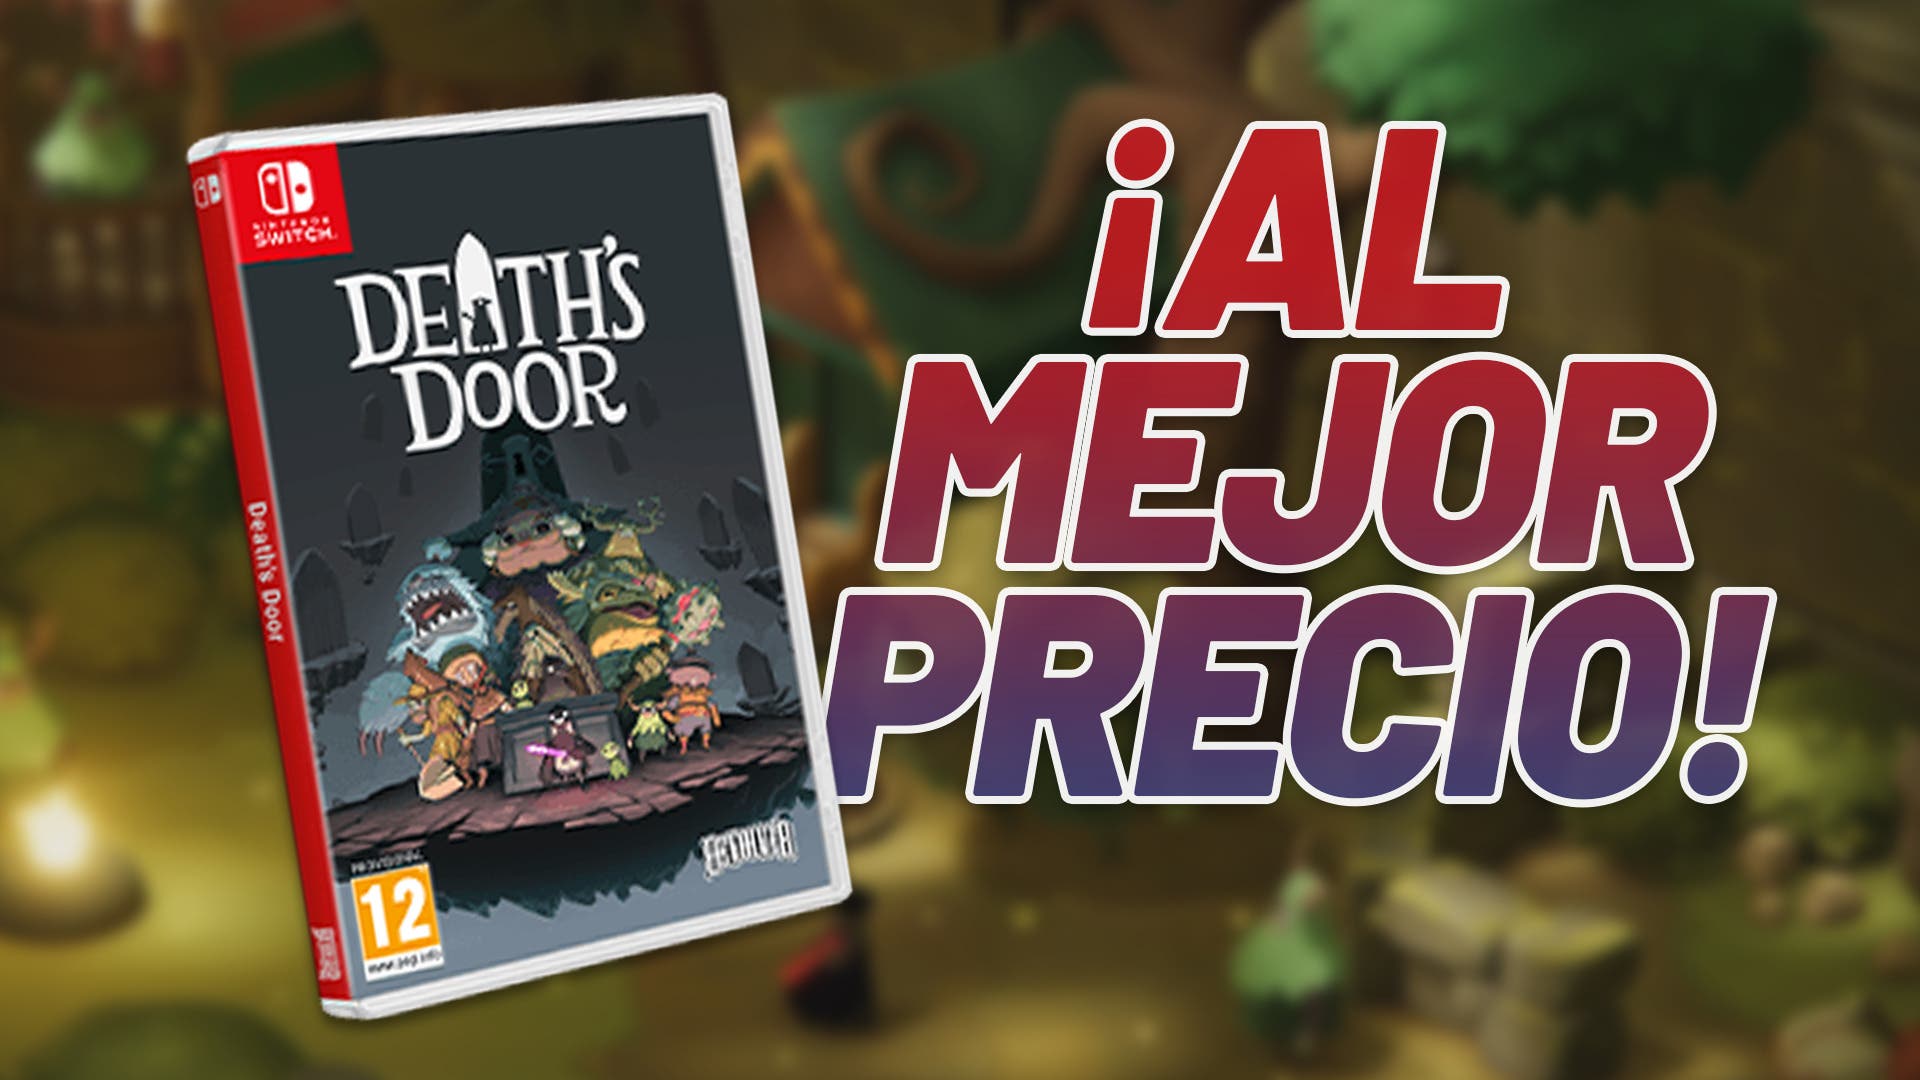 Buy Death’s Door for Nintendo Switch at a ridiculous price thanks to this Amazon offer